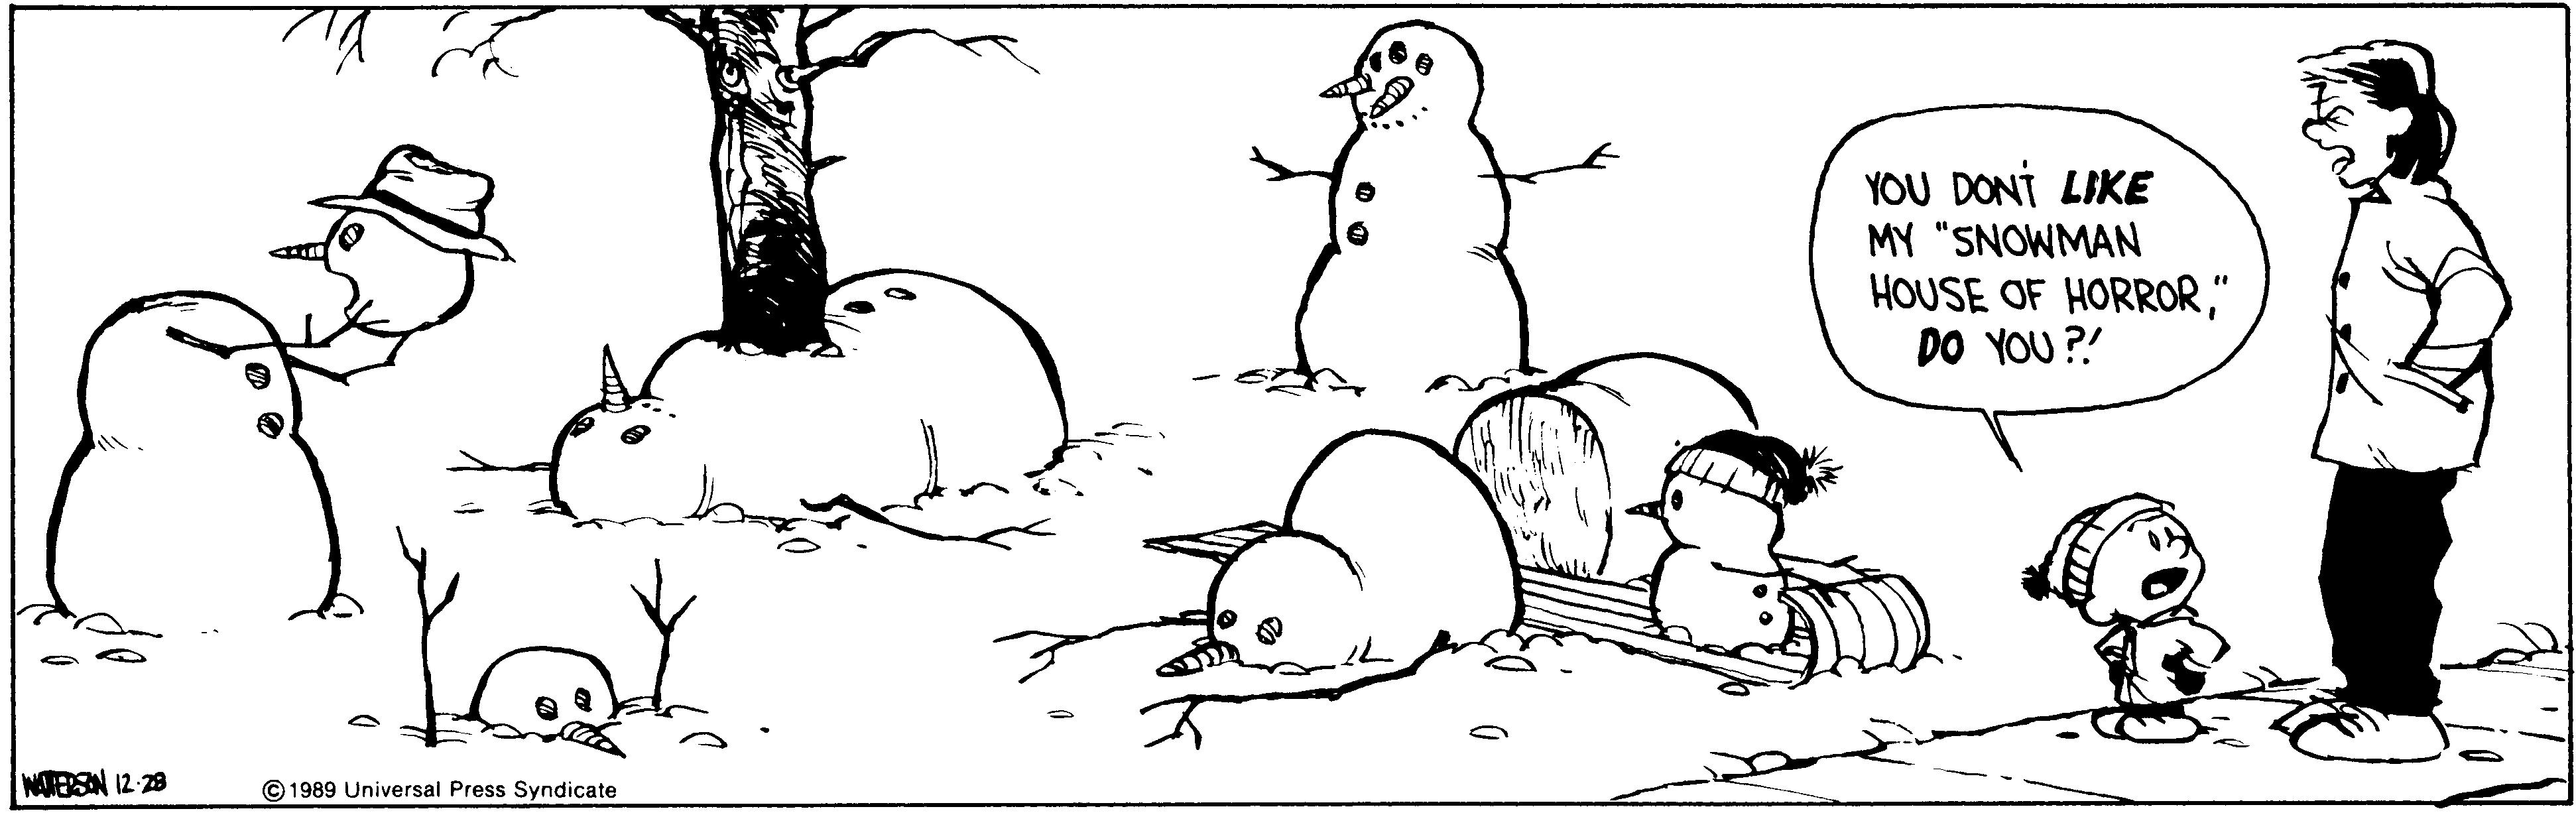 Image result for calvin and hobbes snowmen